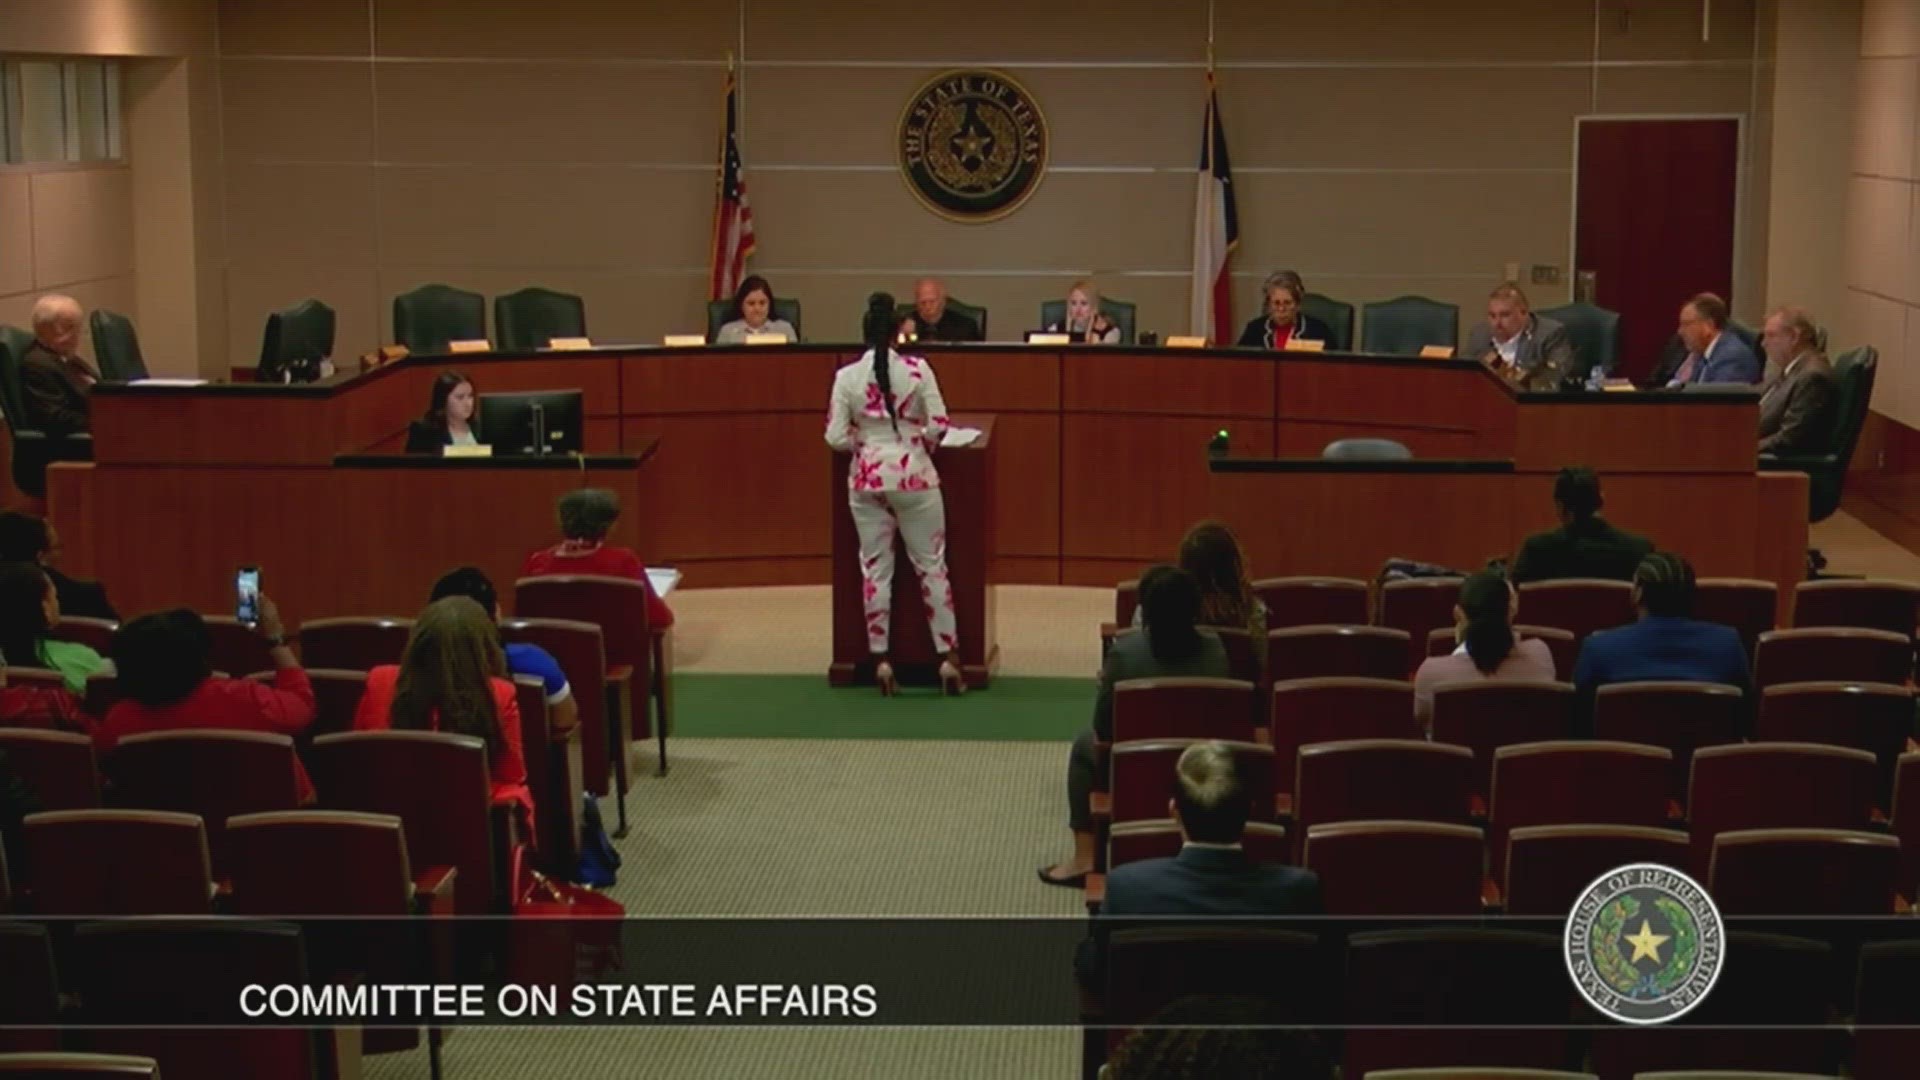 Tashara Parker testified in favor of HB 567, which would prohibit bans on certain hairstyles. You can find her full testimony on the WFAA YouTube channel.